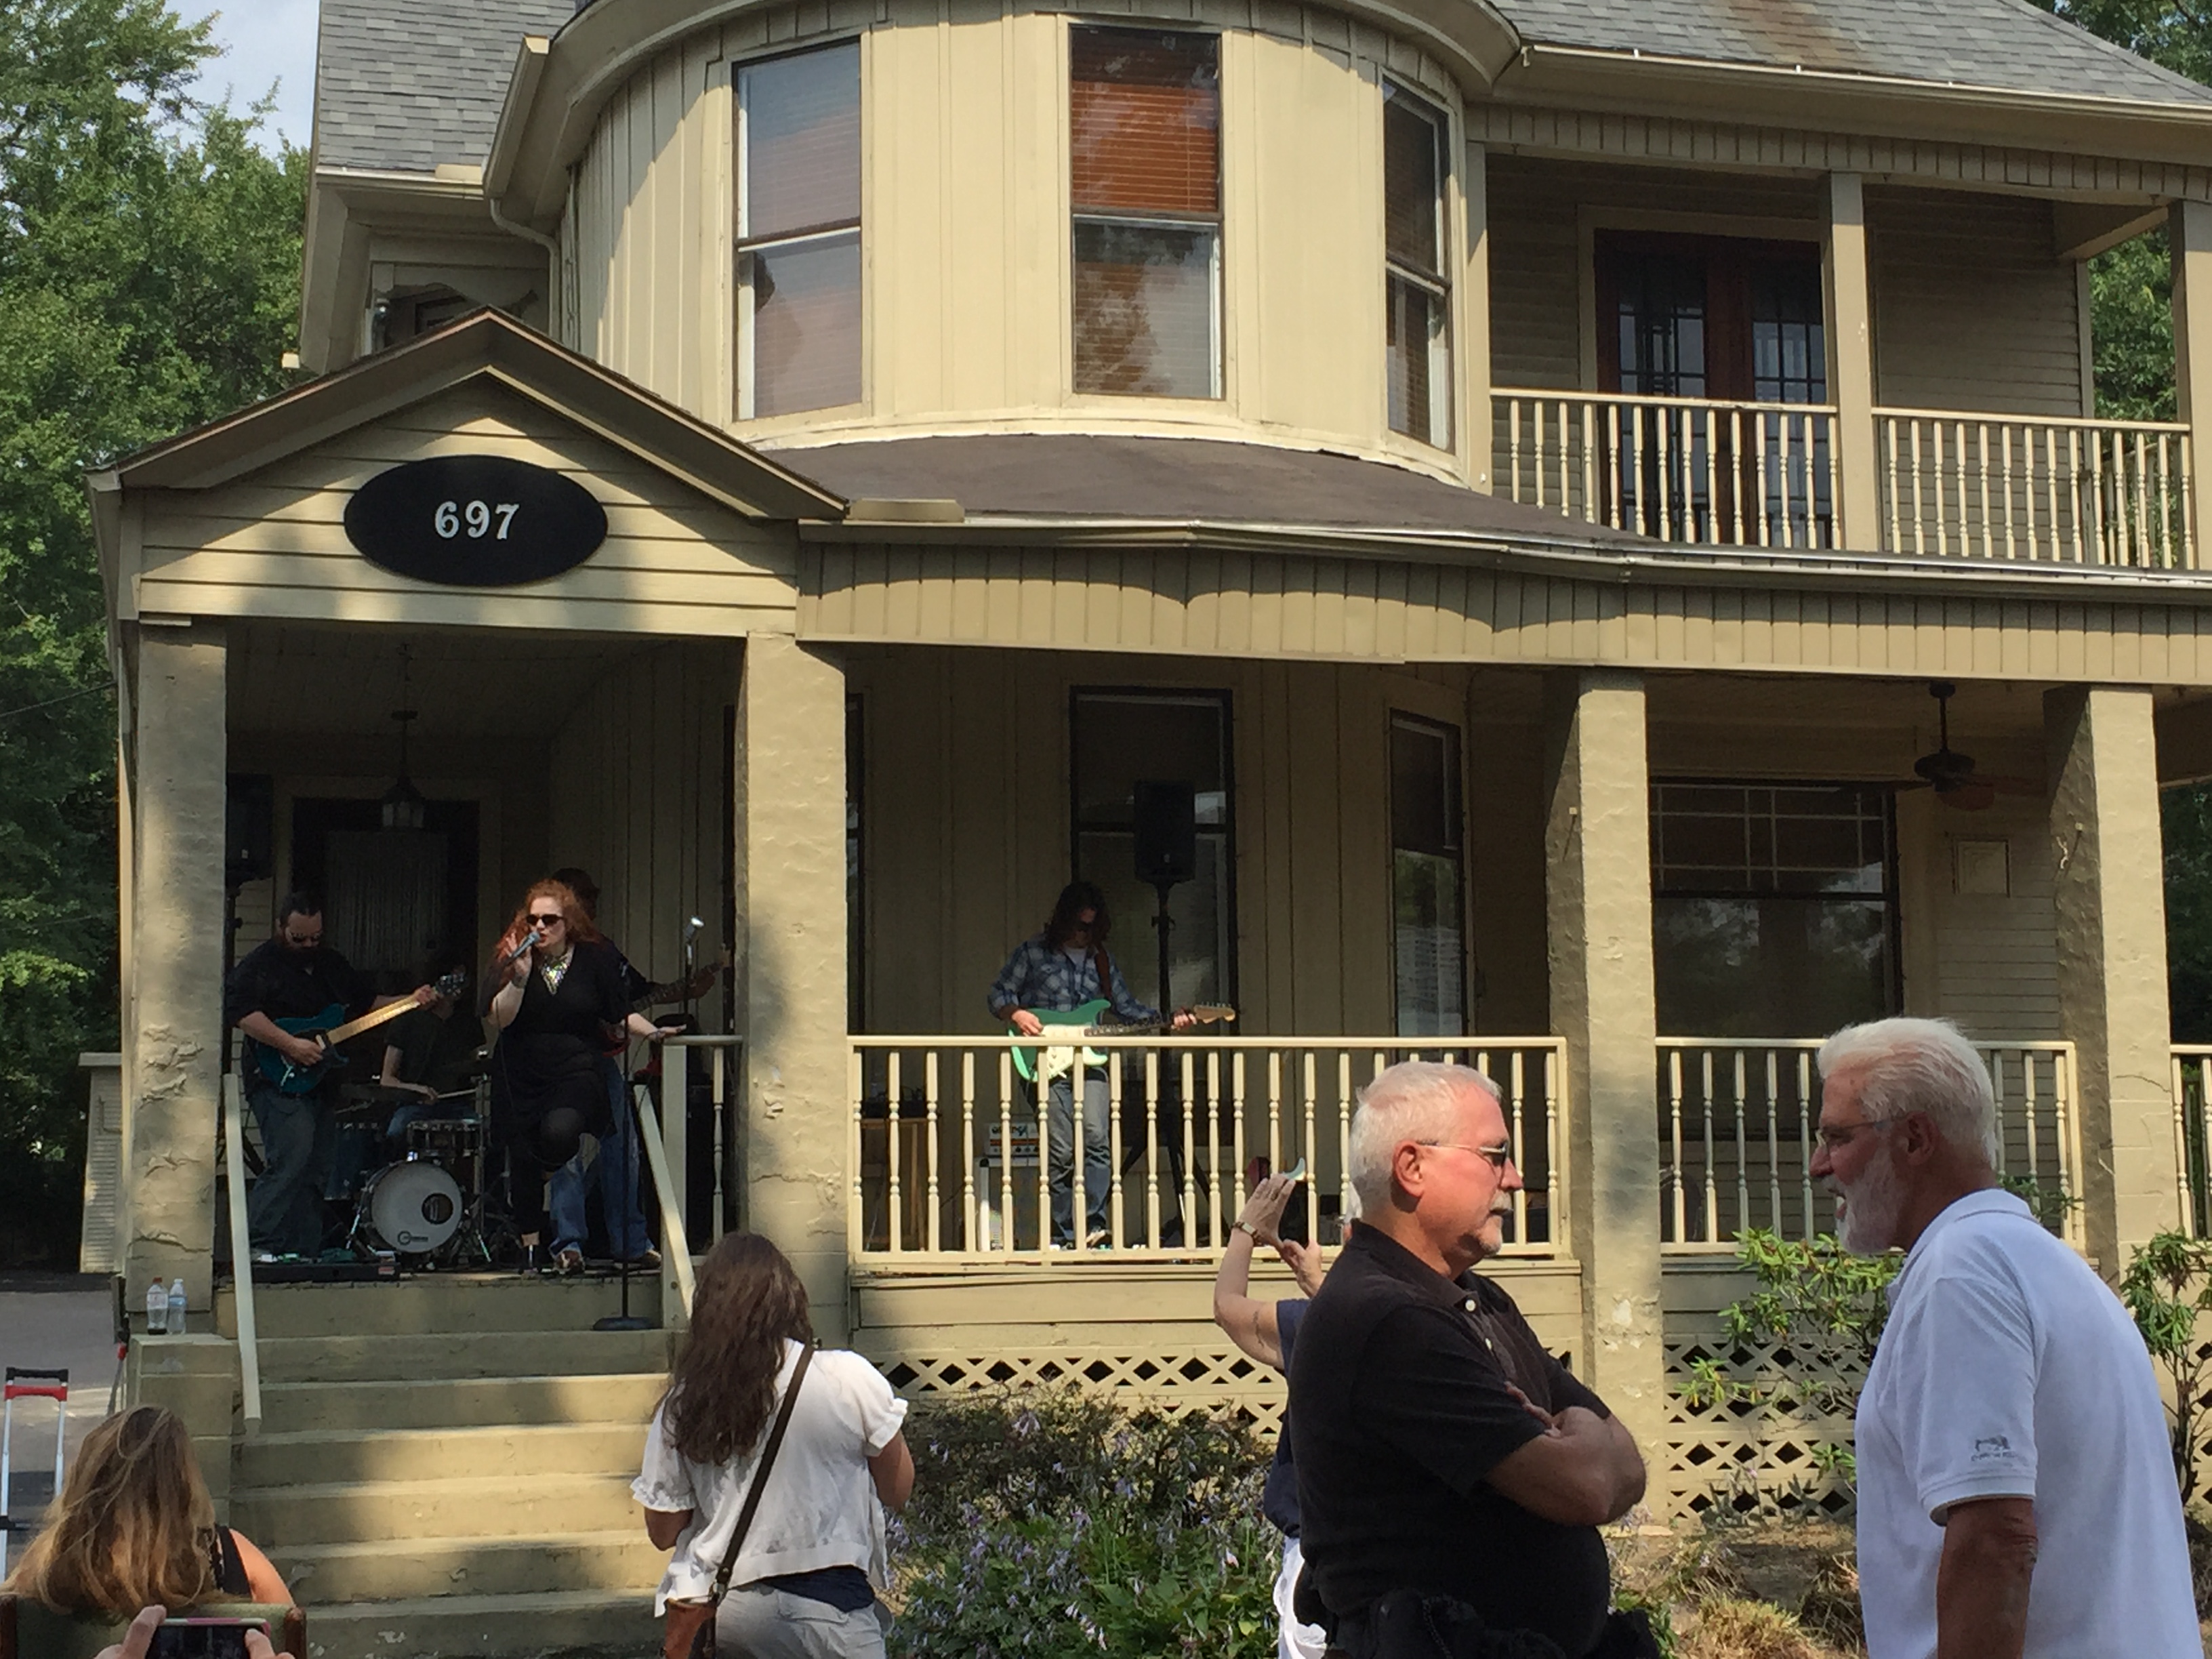 Porch Rokr Neighborhood music festival in Akron, Ohio, attracts almost